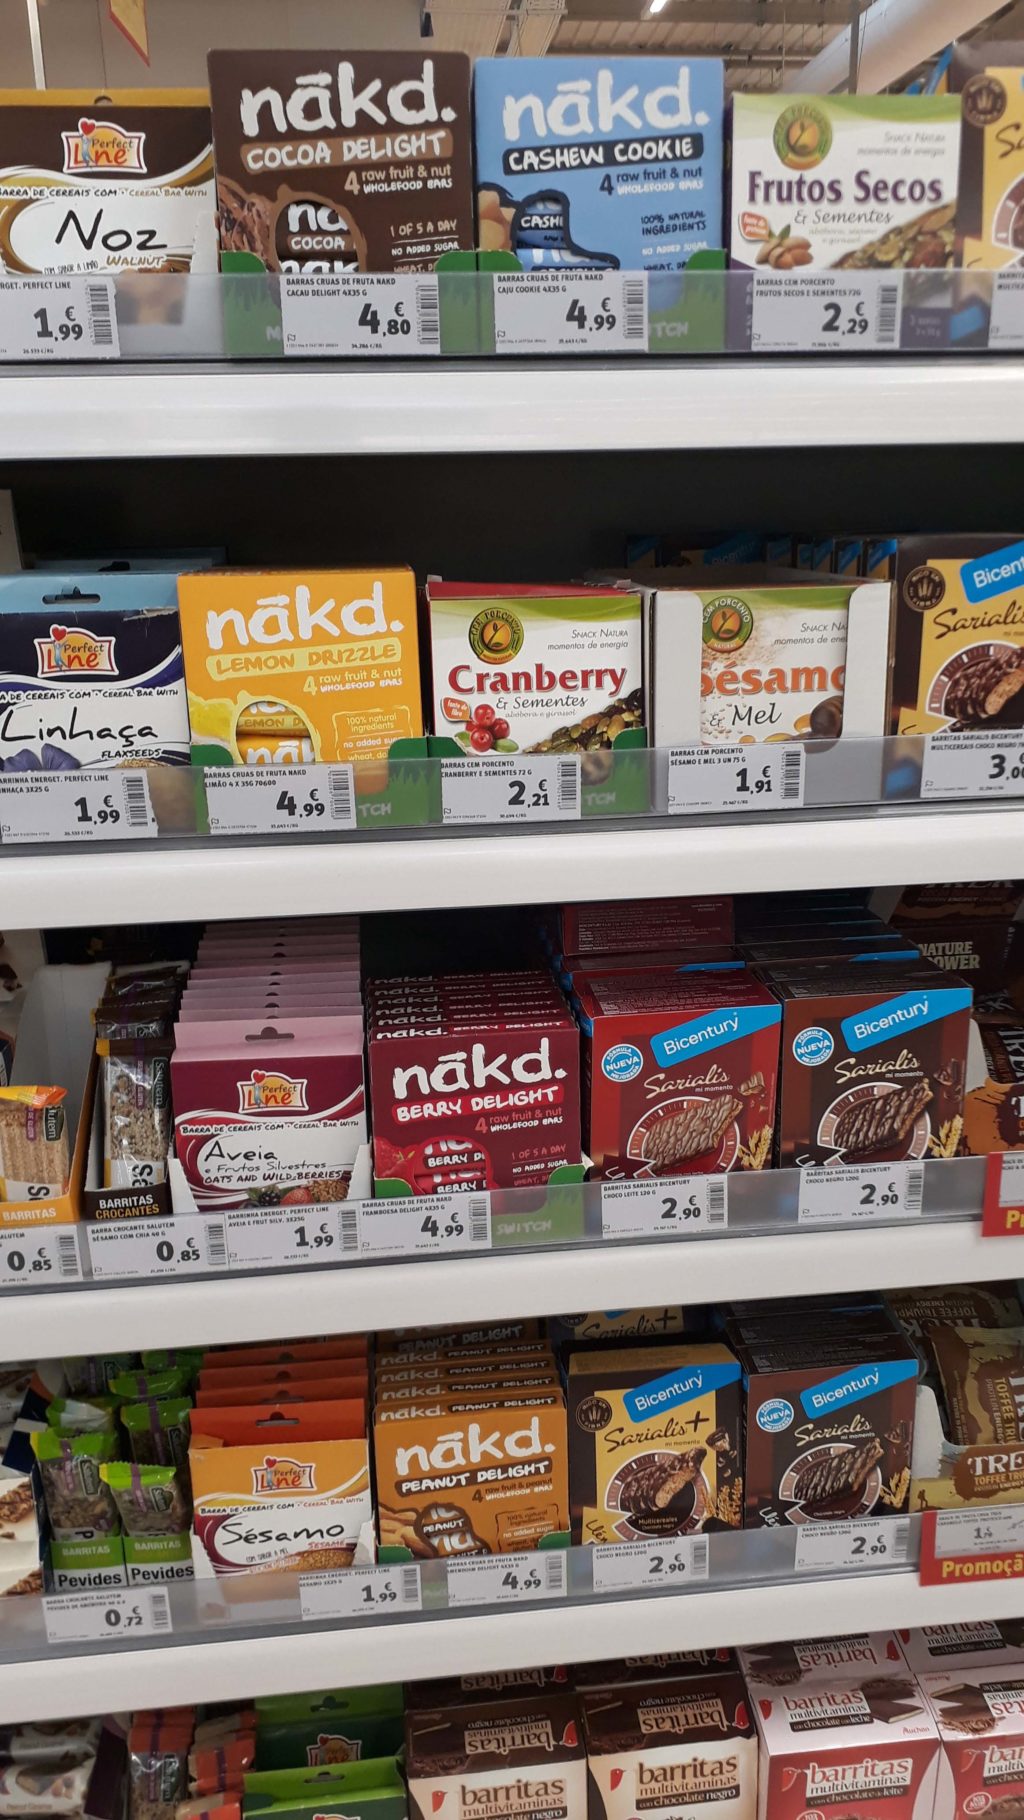 All nakd. bars are vegan and delicious;)